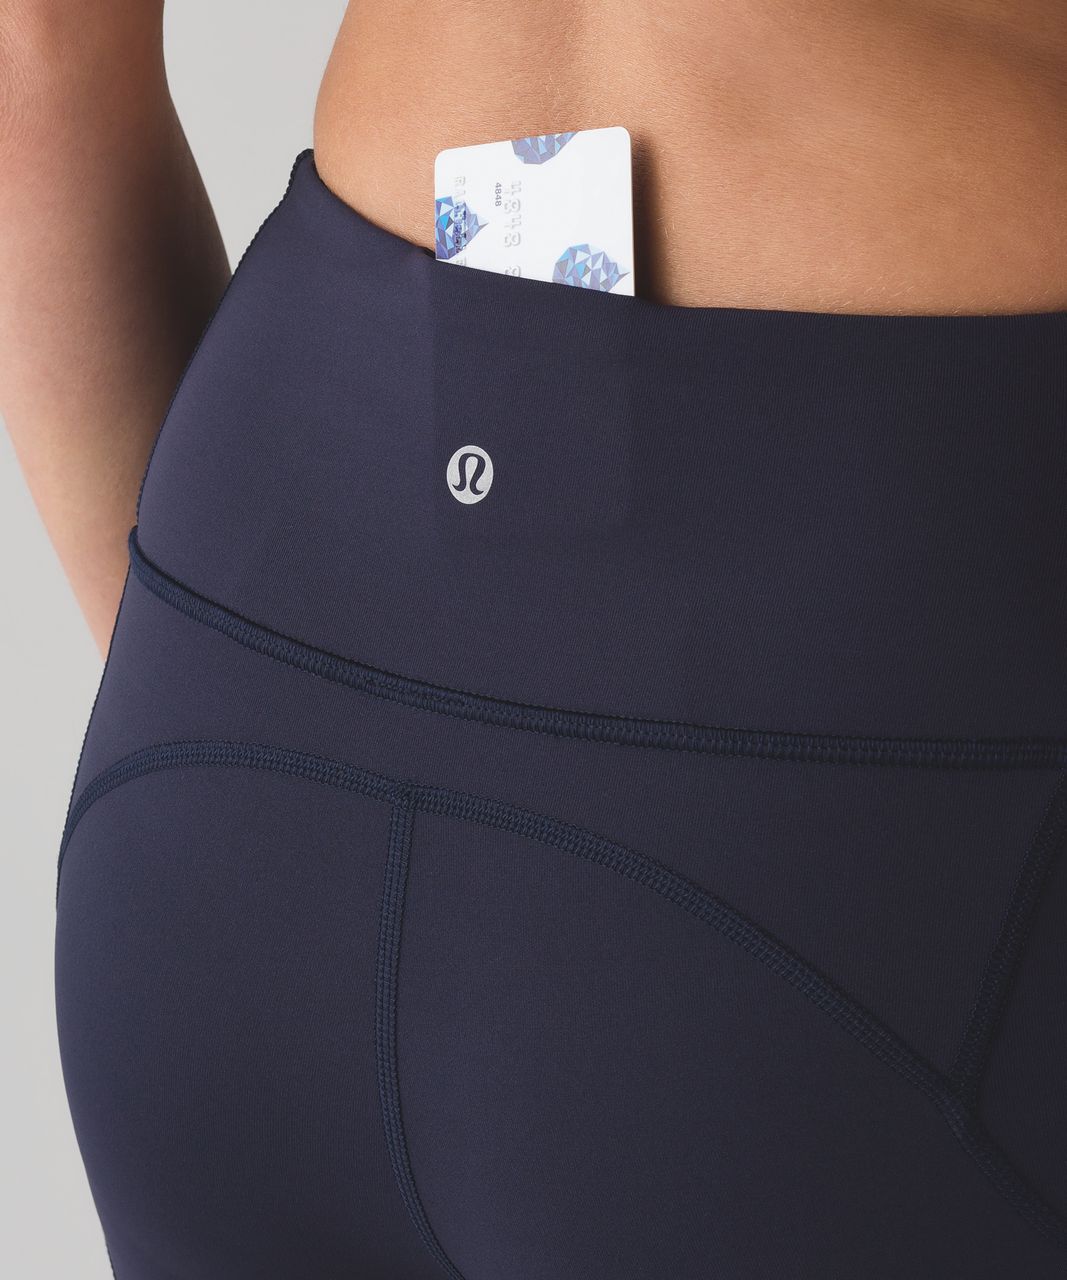 Lululemon All The Right Places Crop II (23") - Midnight Navy